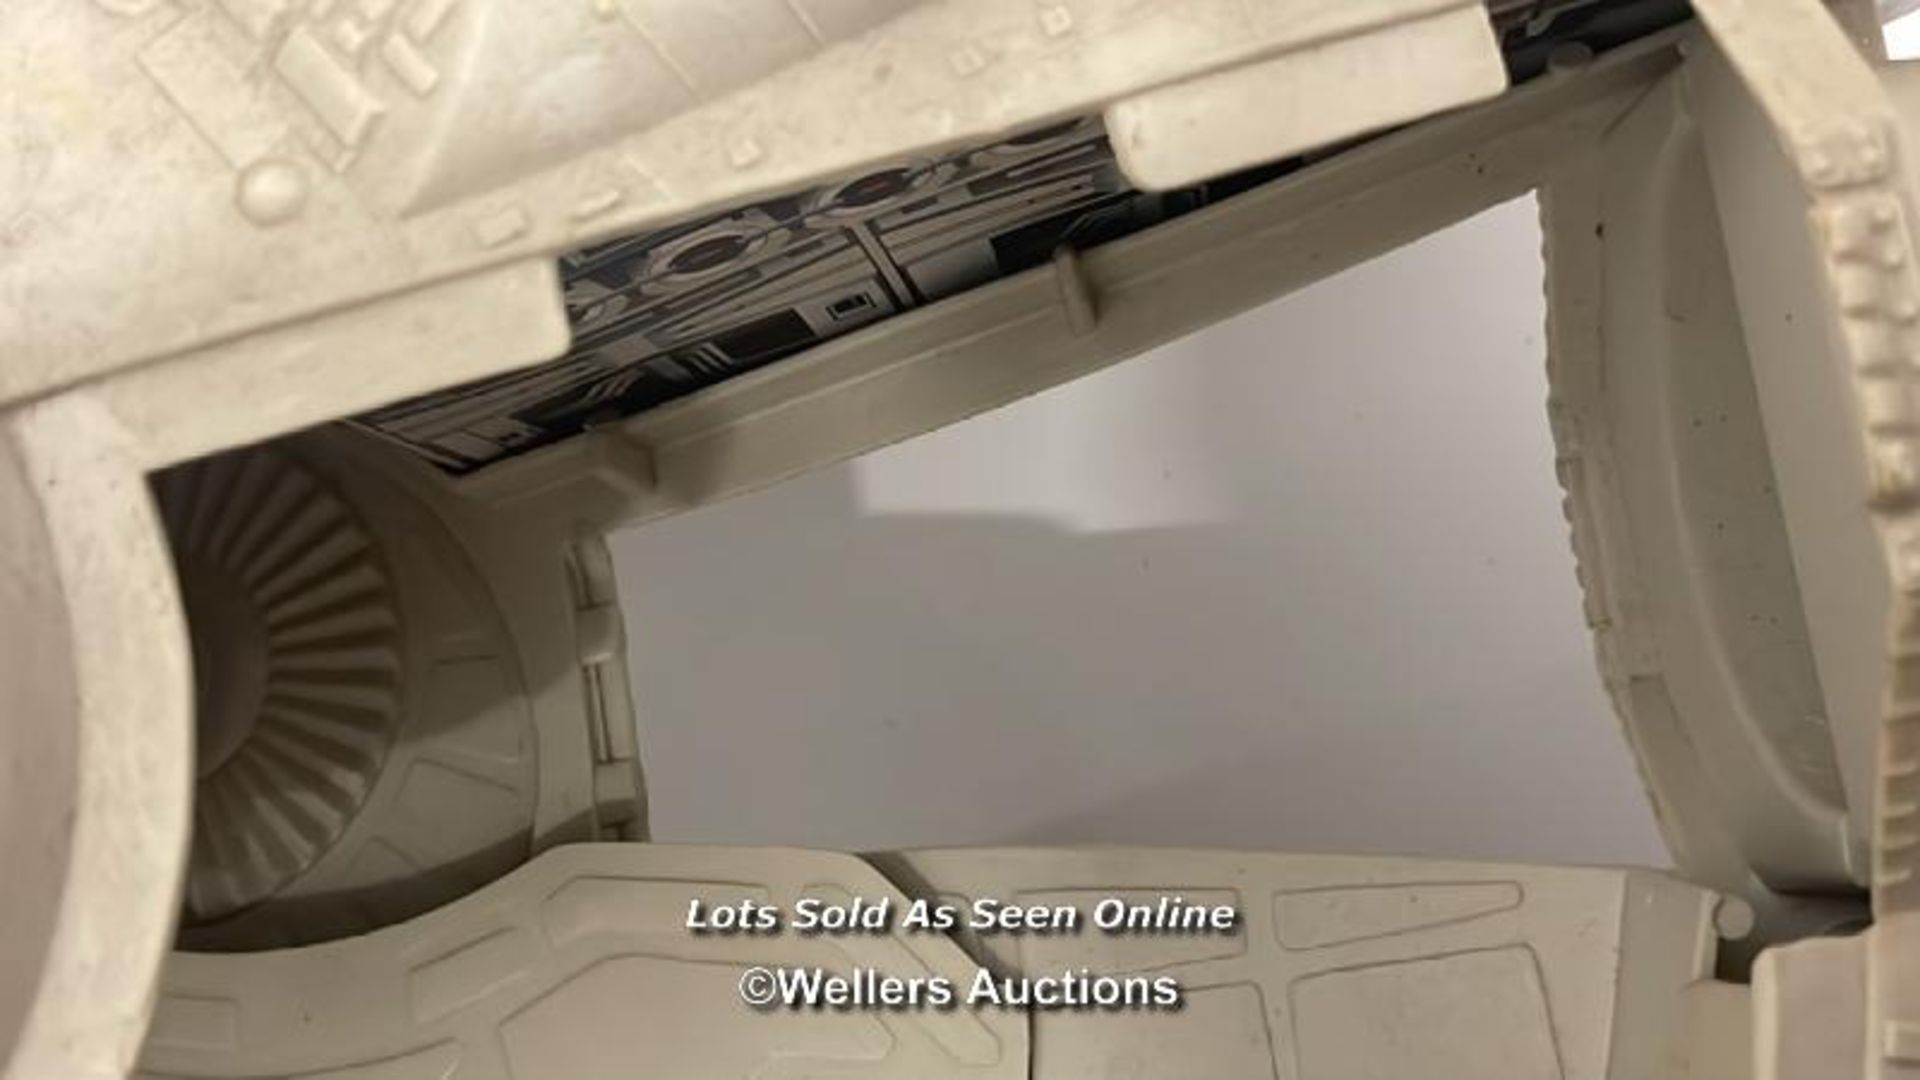 Palitoy vintage Return of the Jedi Millenium Falcon vehicle, with original training ball and floor - Image 10 of 11